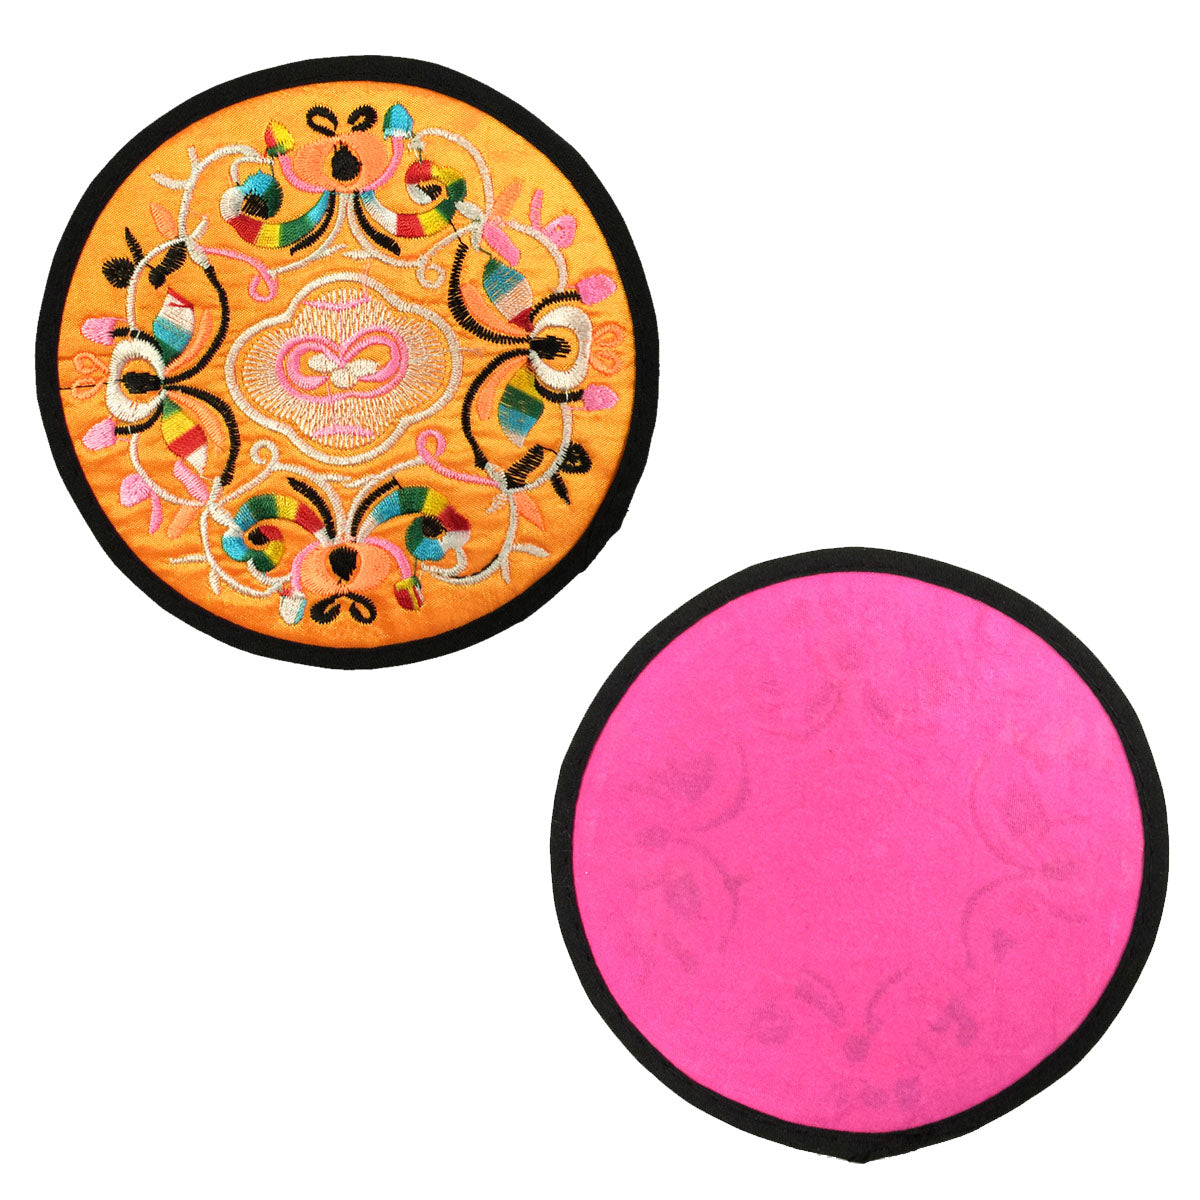 Wrapables Ethnic Embroidered Coasters Set of 6